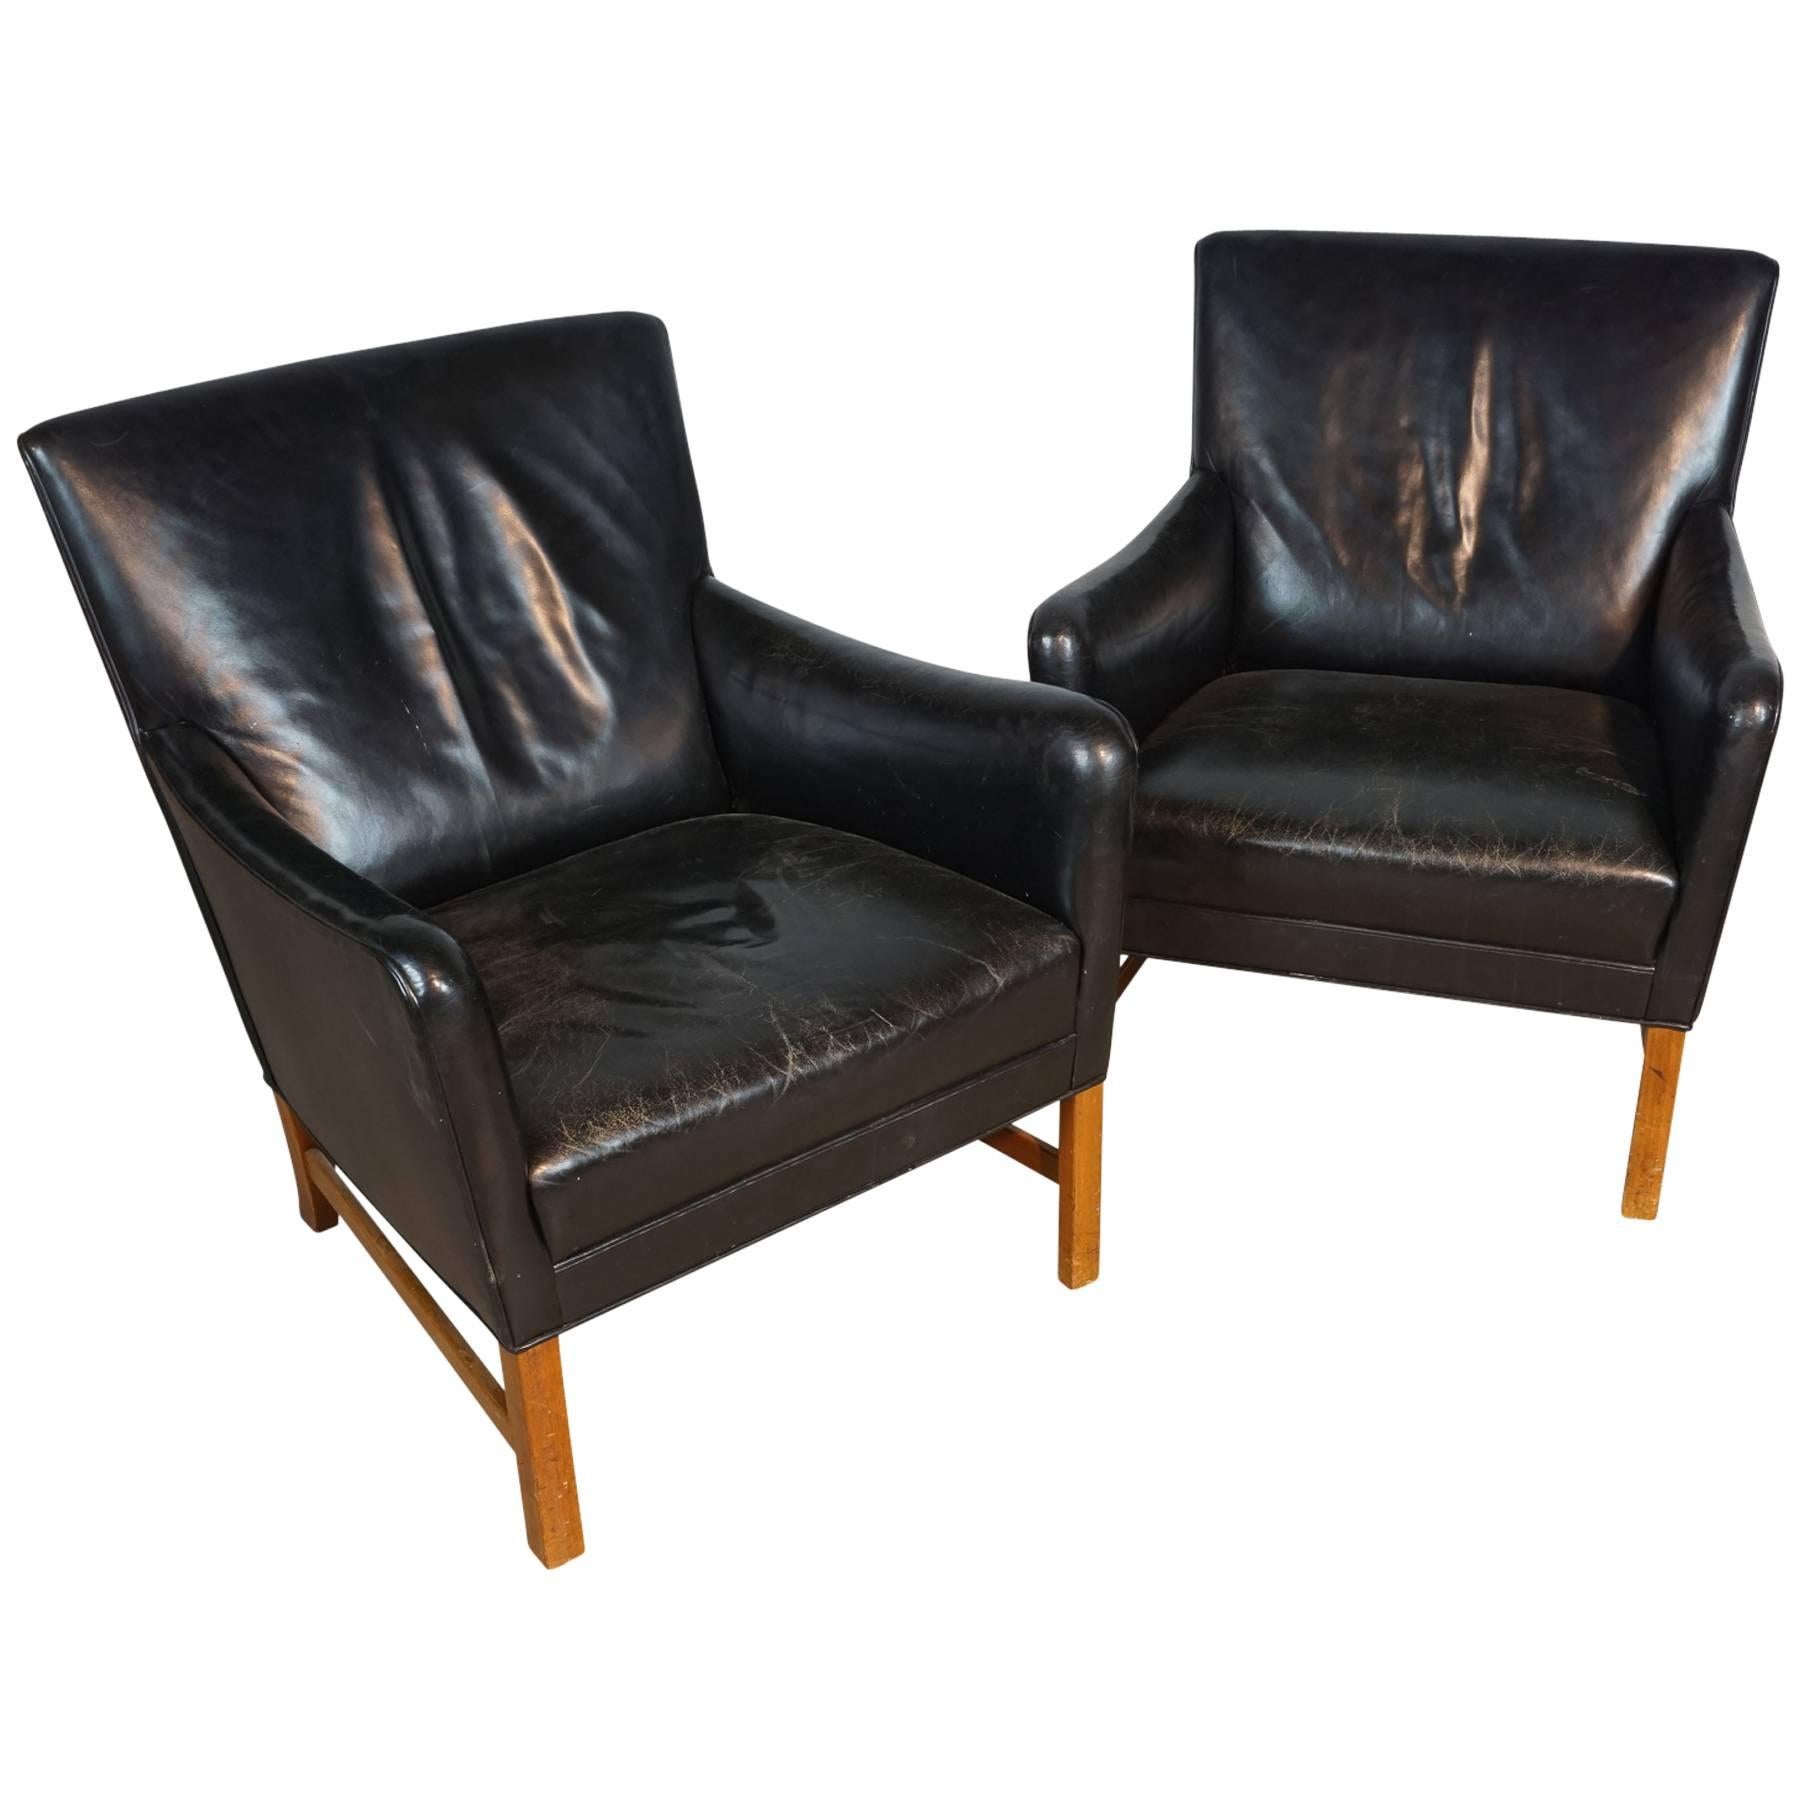 Superb Pair of Ole Wanscher Lounge Chairs